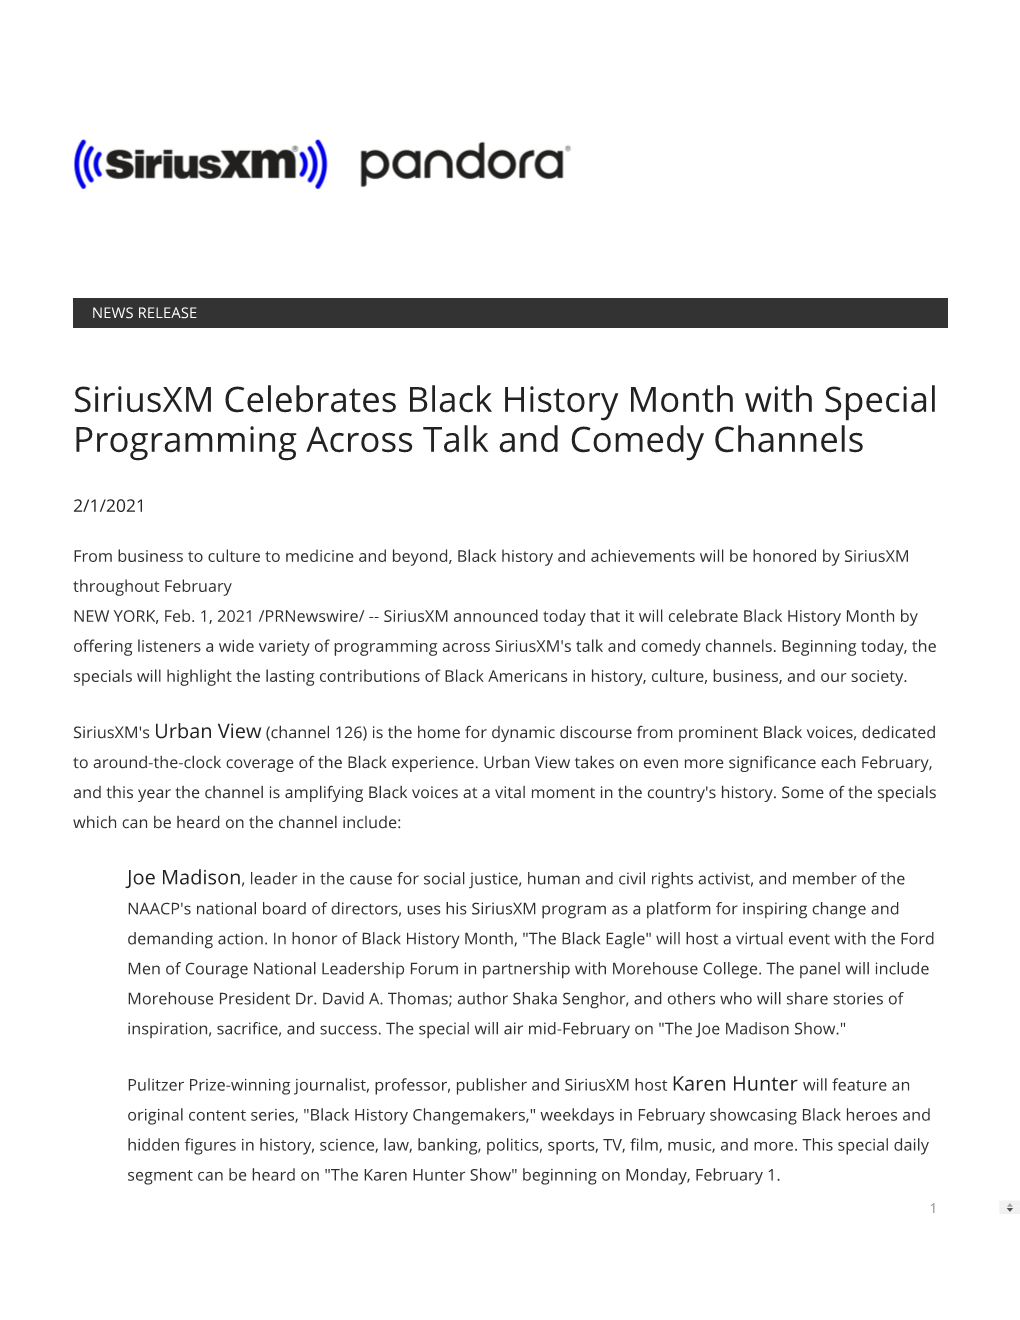 Siriusxm Celebrates Black History Month with Special Programming Across Talk and Comedy Channels